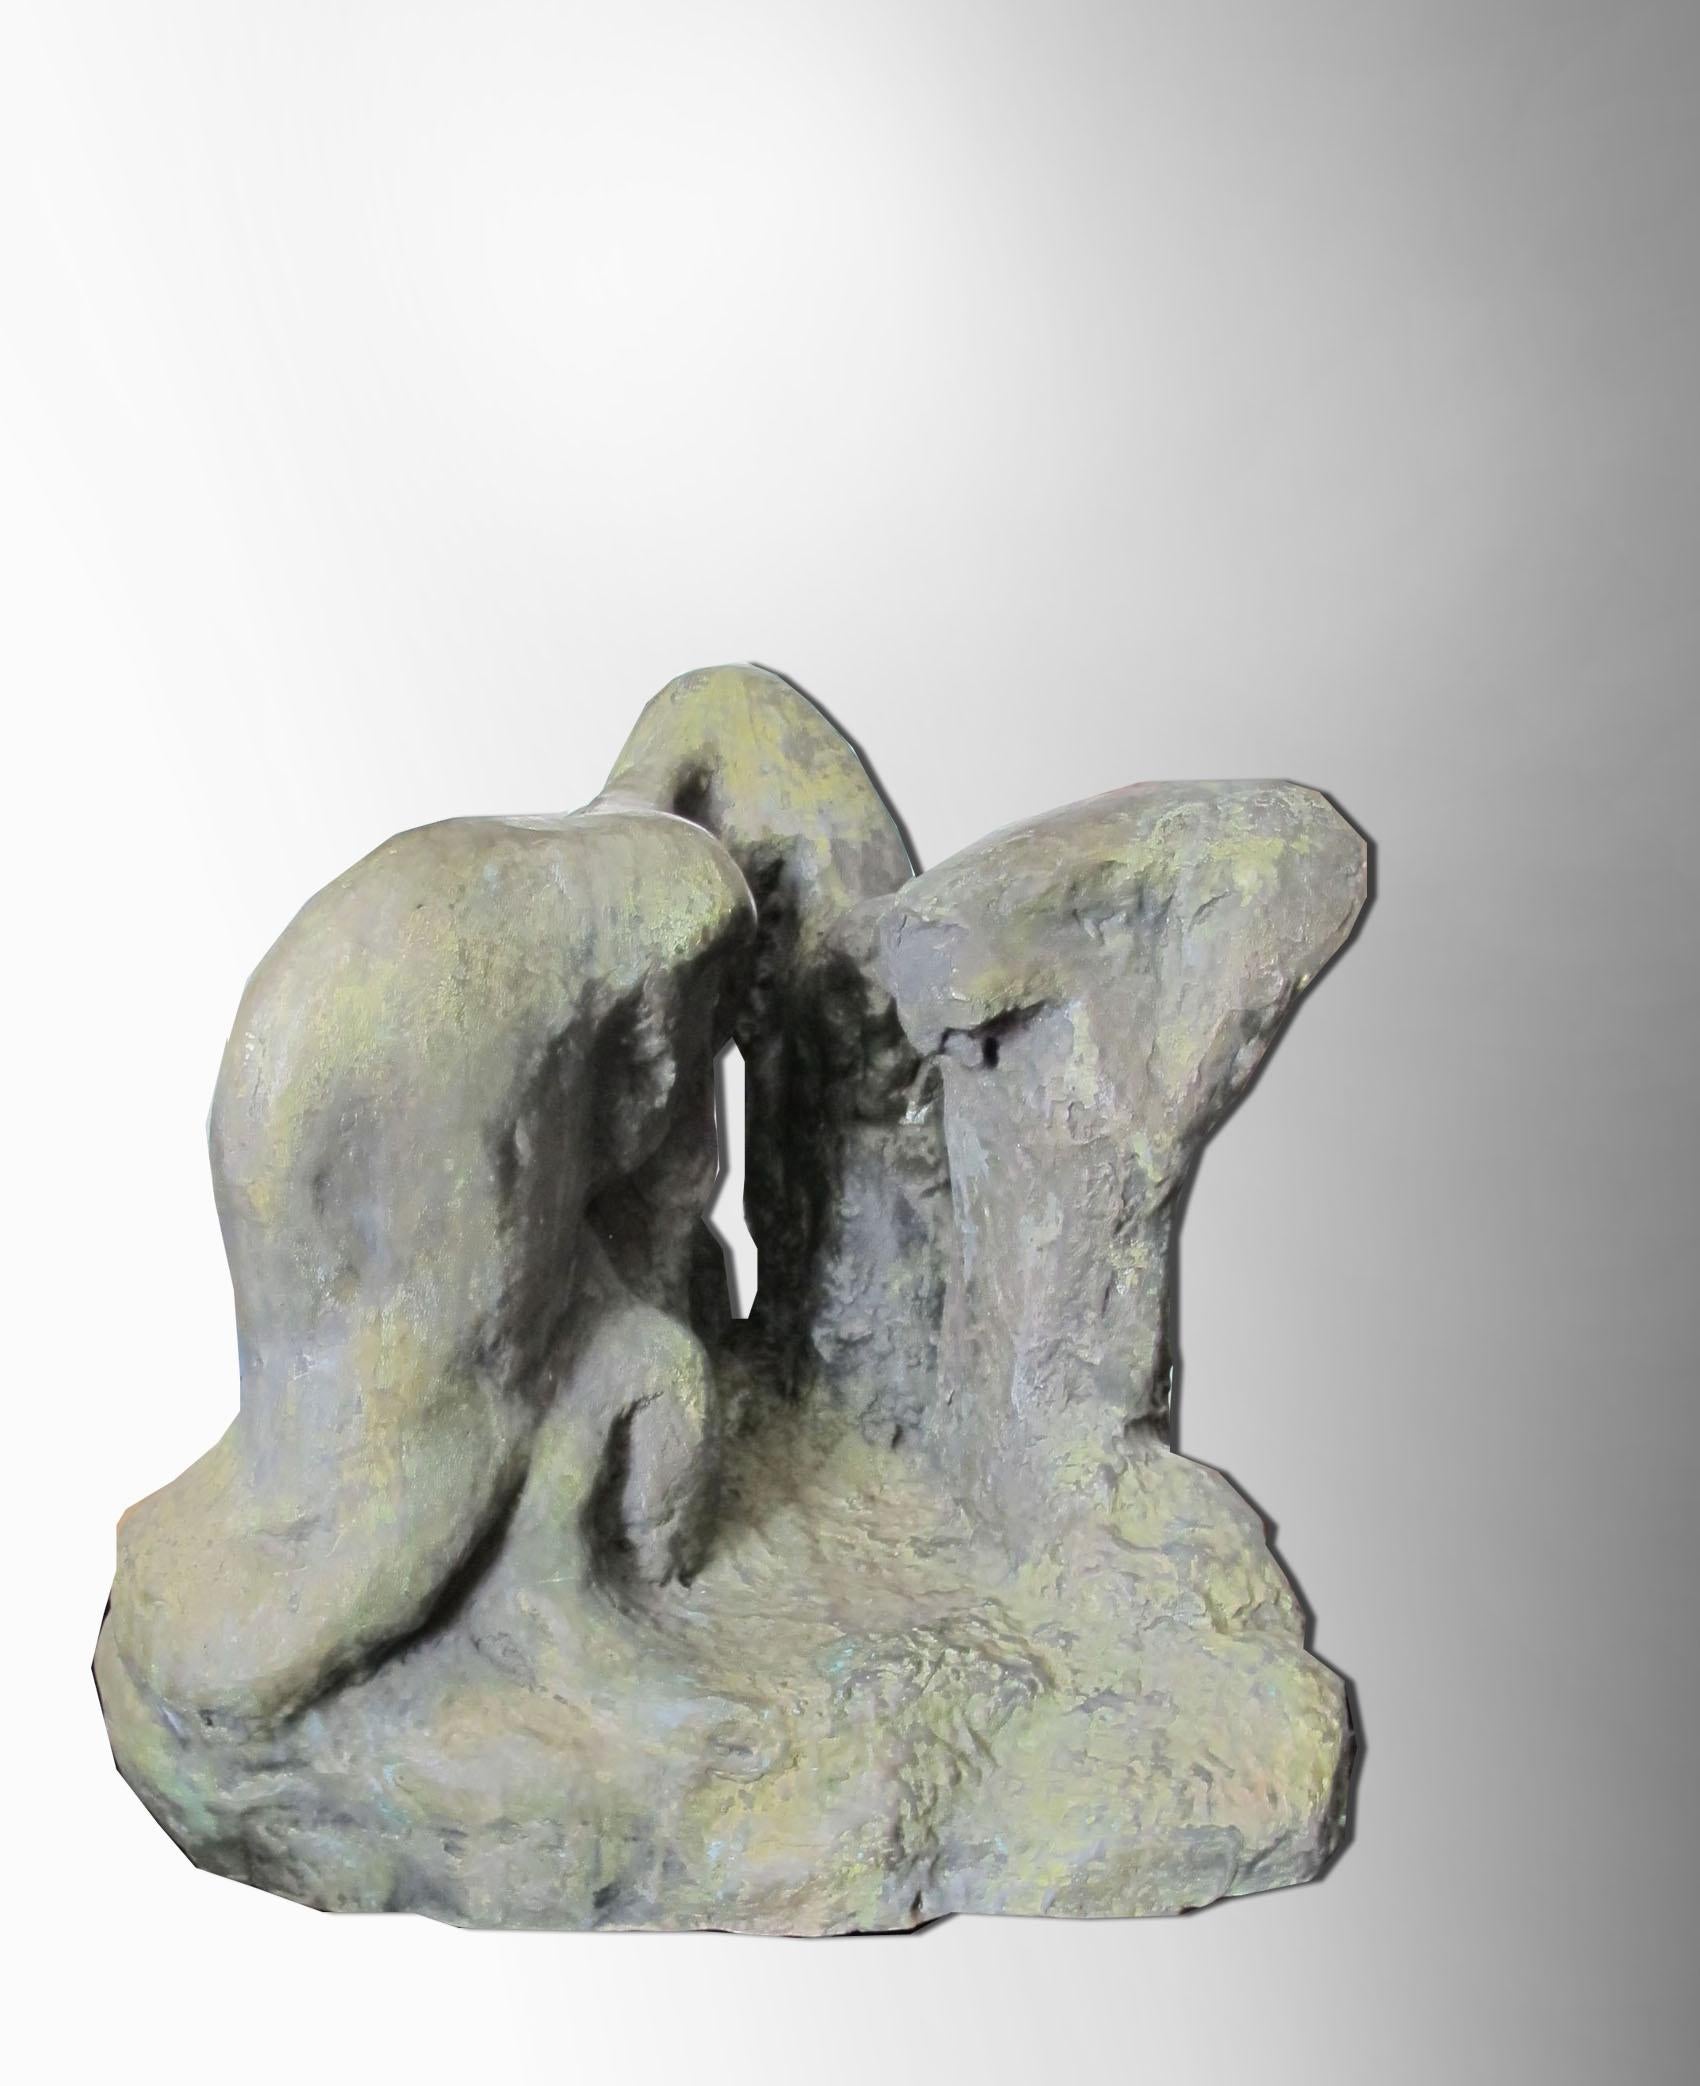 Bronze with yellow and green patination, Lalloz Foundry, 1/8, signed.
Bibliography :
- 17th International Impact Art Festival, 1996, Kyoto (Japon), p.15
- Pierre Descargues, Catherine Val la Clandestine, Paris, ARAE/Descargues & Cie, 2011, page